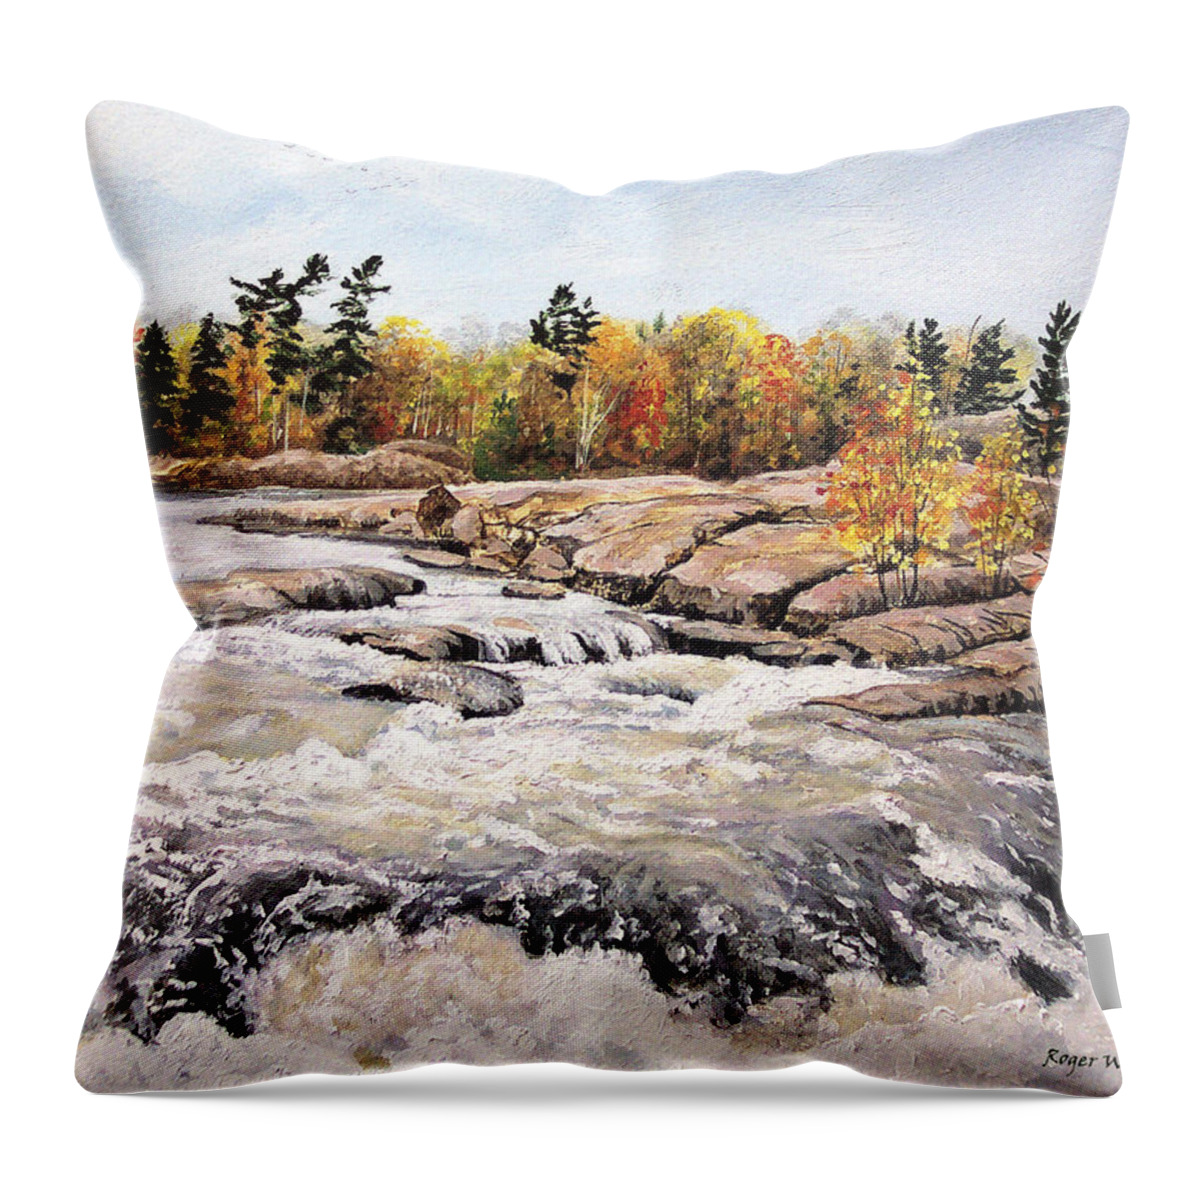 fall Season Throw Pillow featuring the painting Burleigh Falls by Roger Witmer